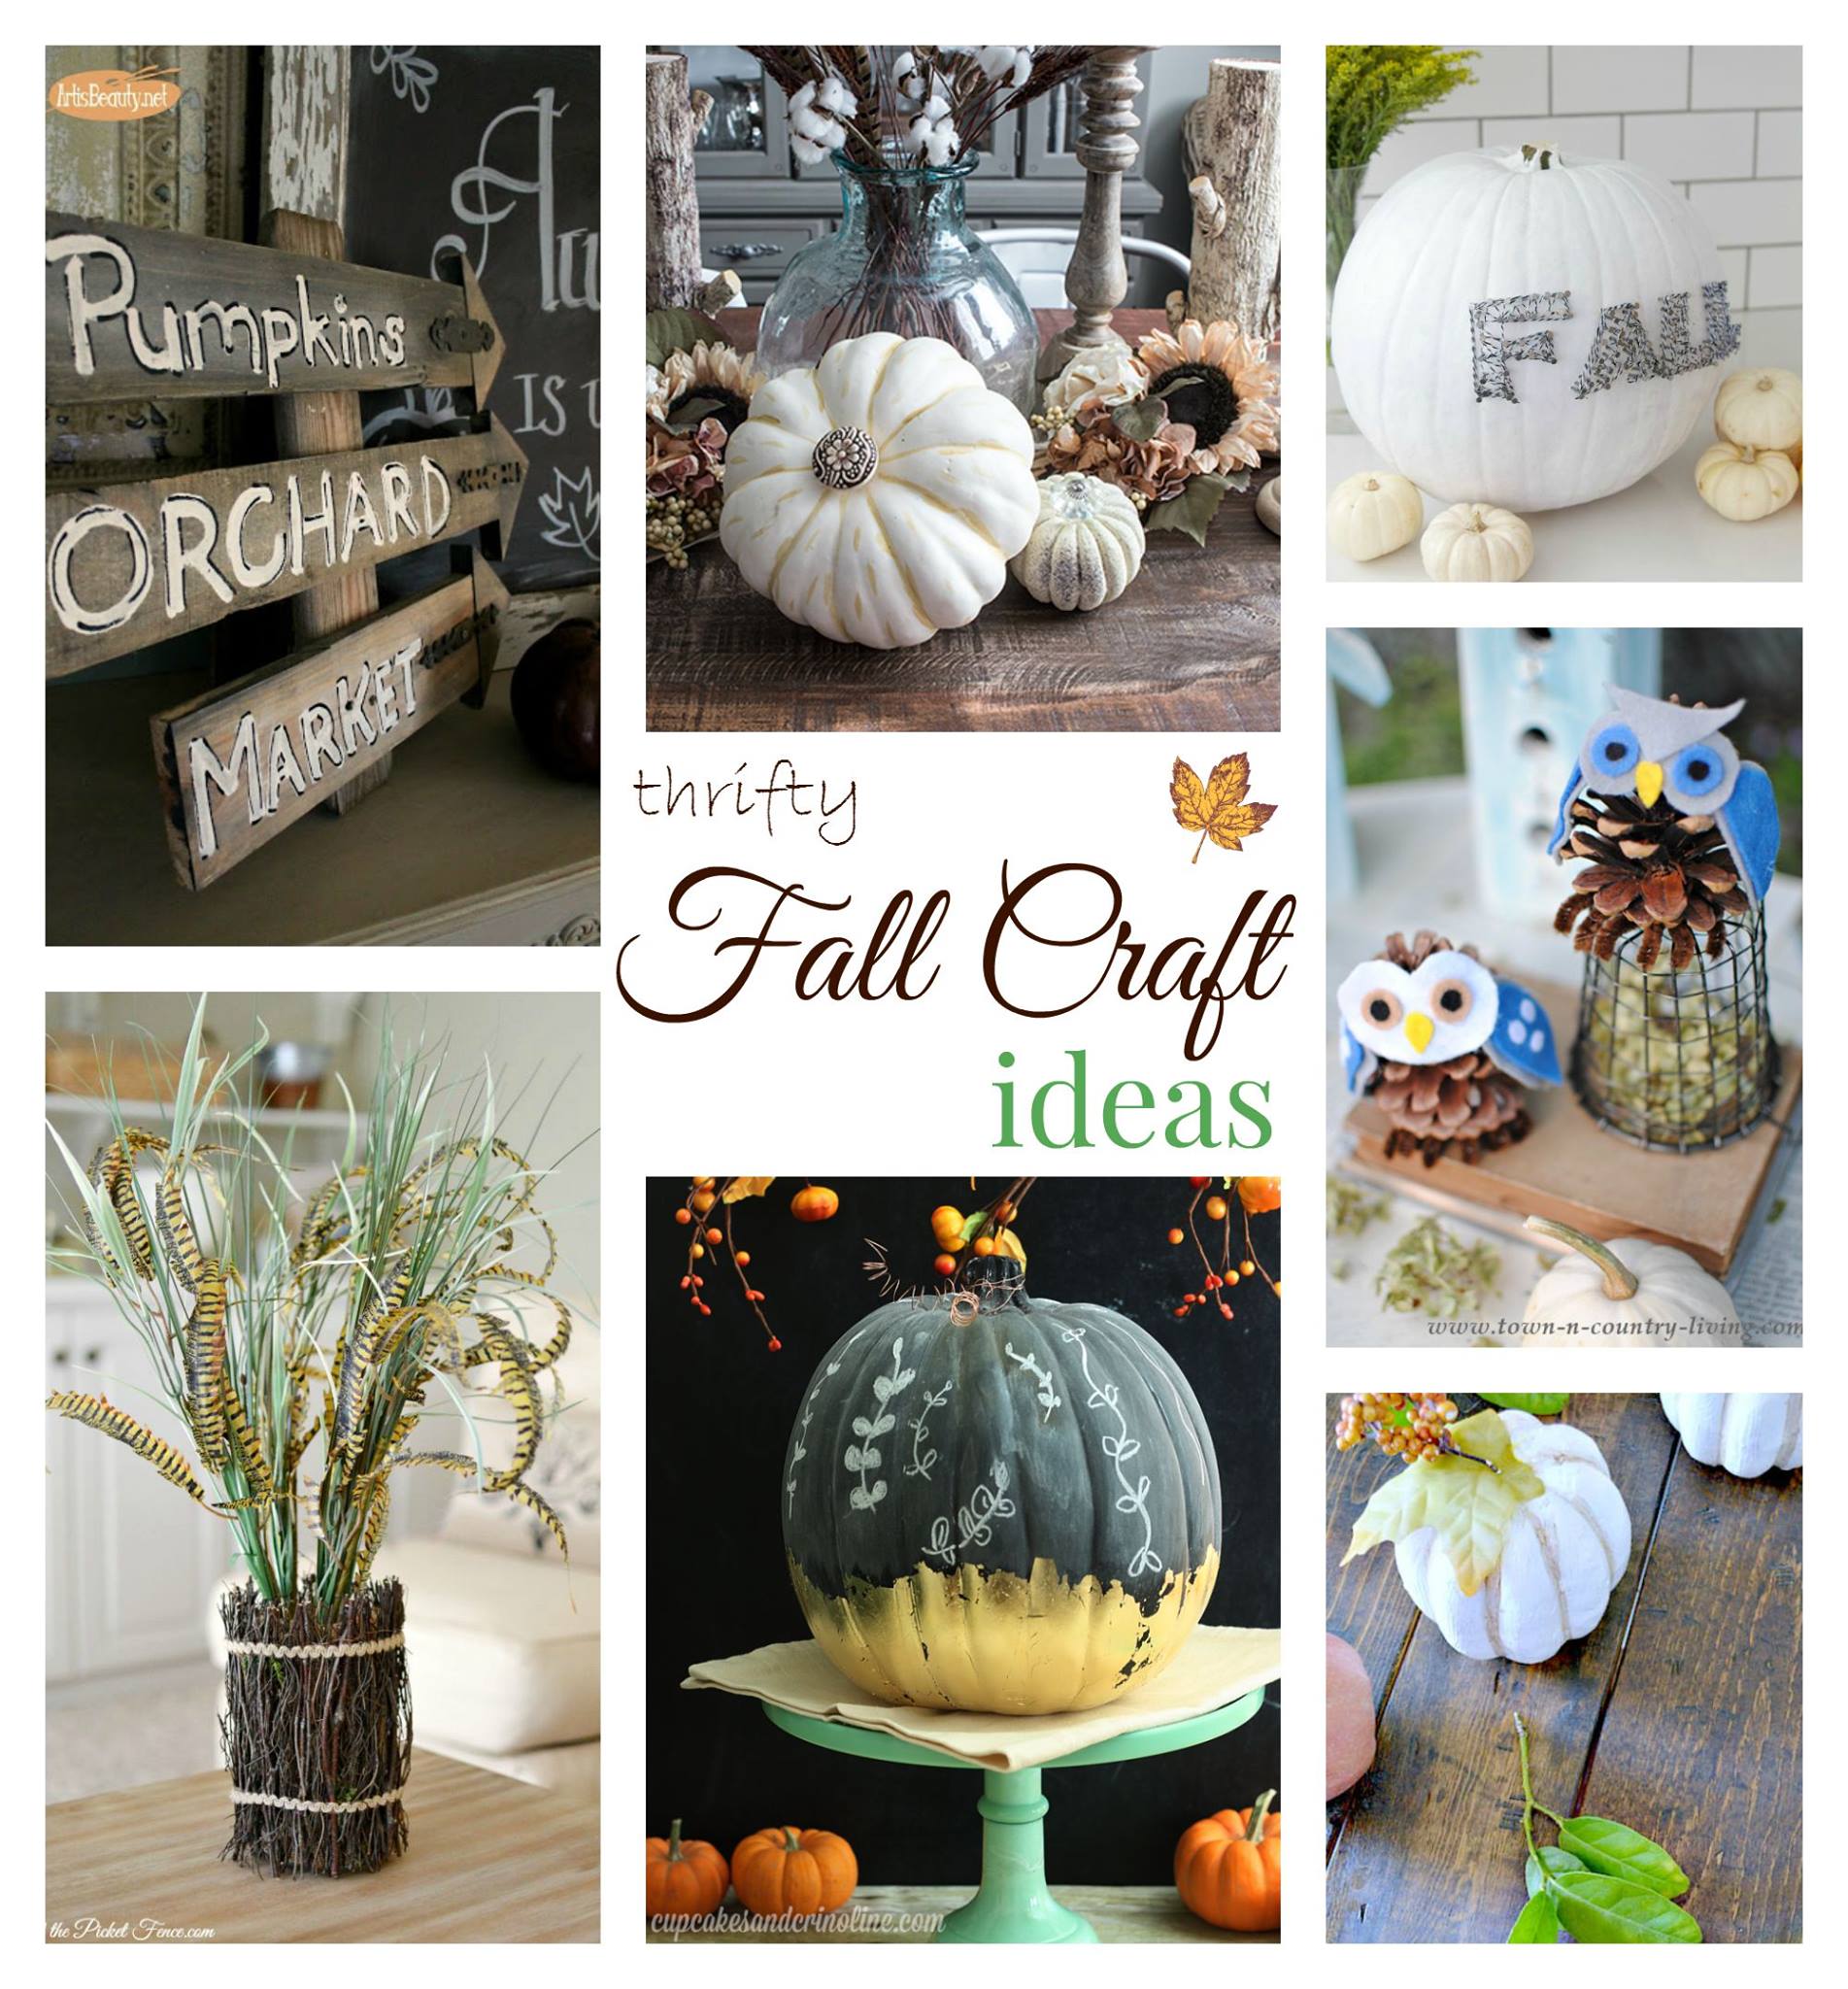 Fall group crafts